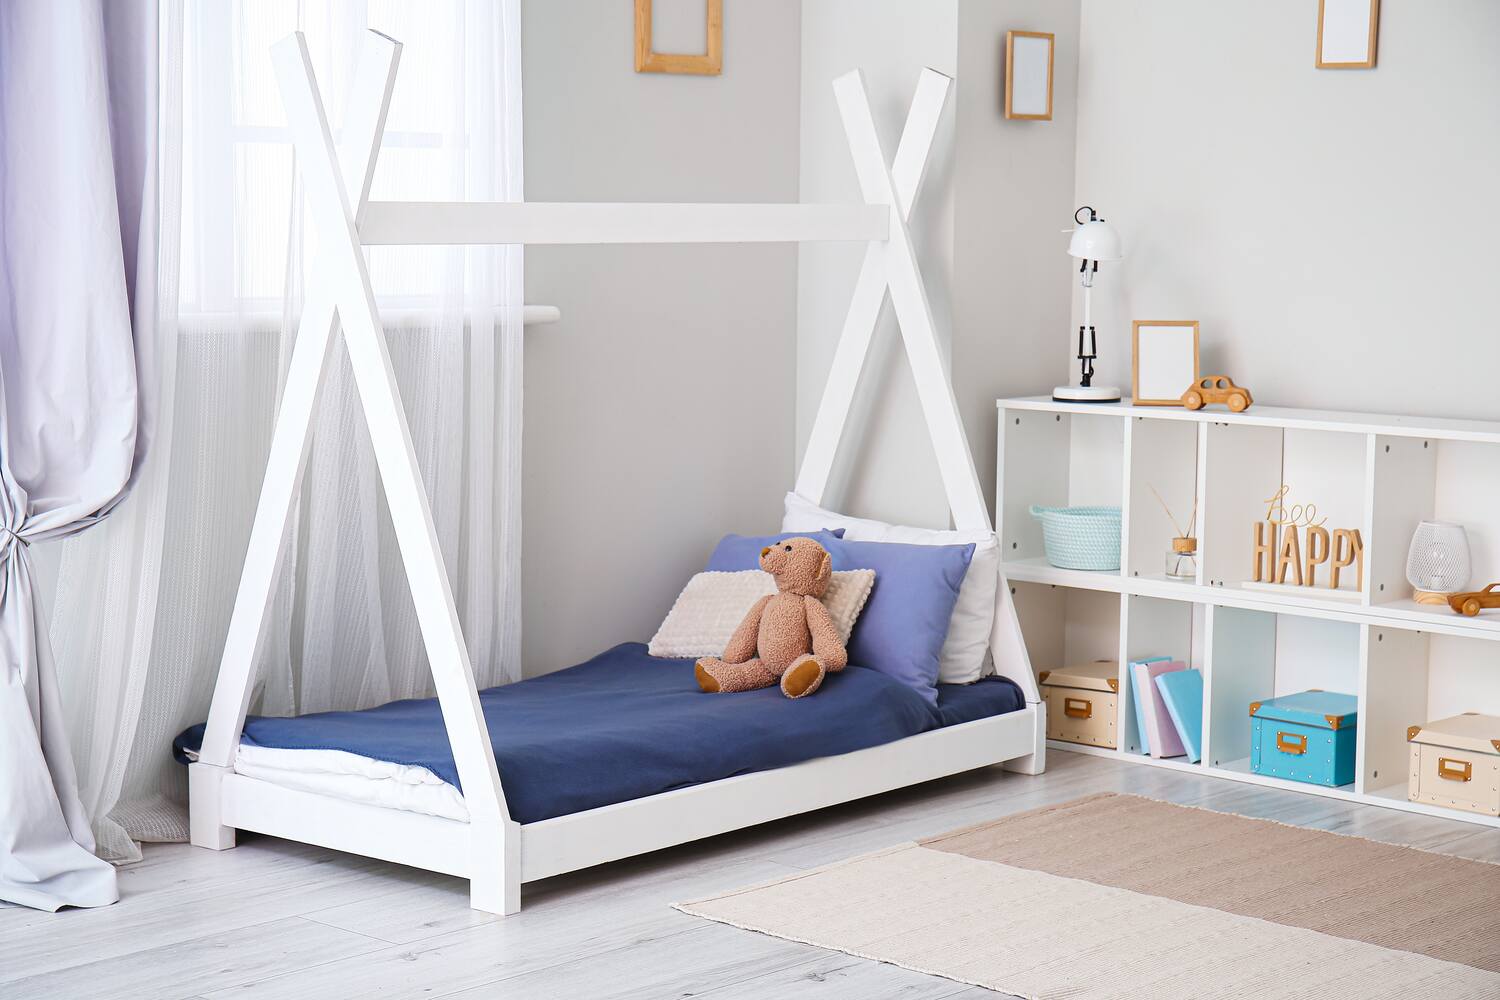 A toddler bed is good if your toddler is not staying in crib